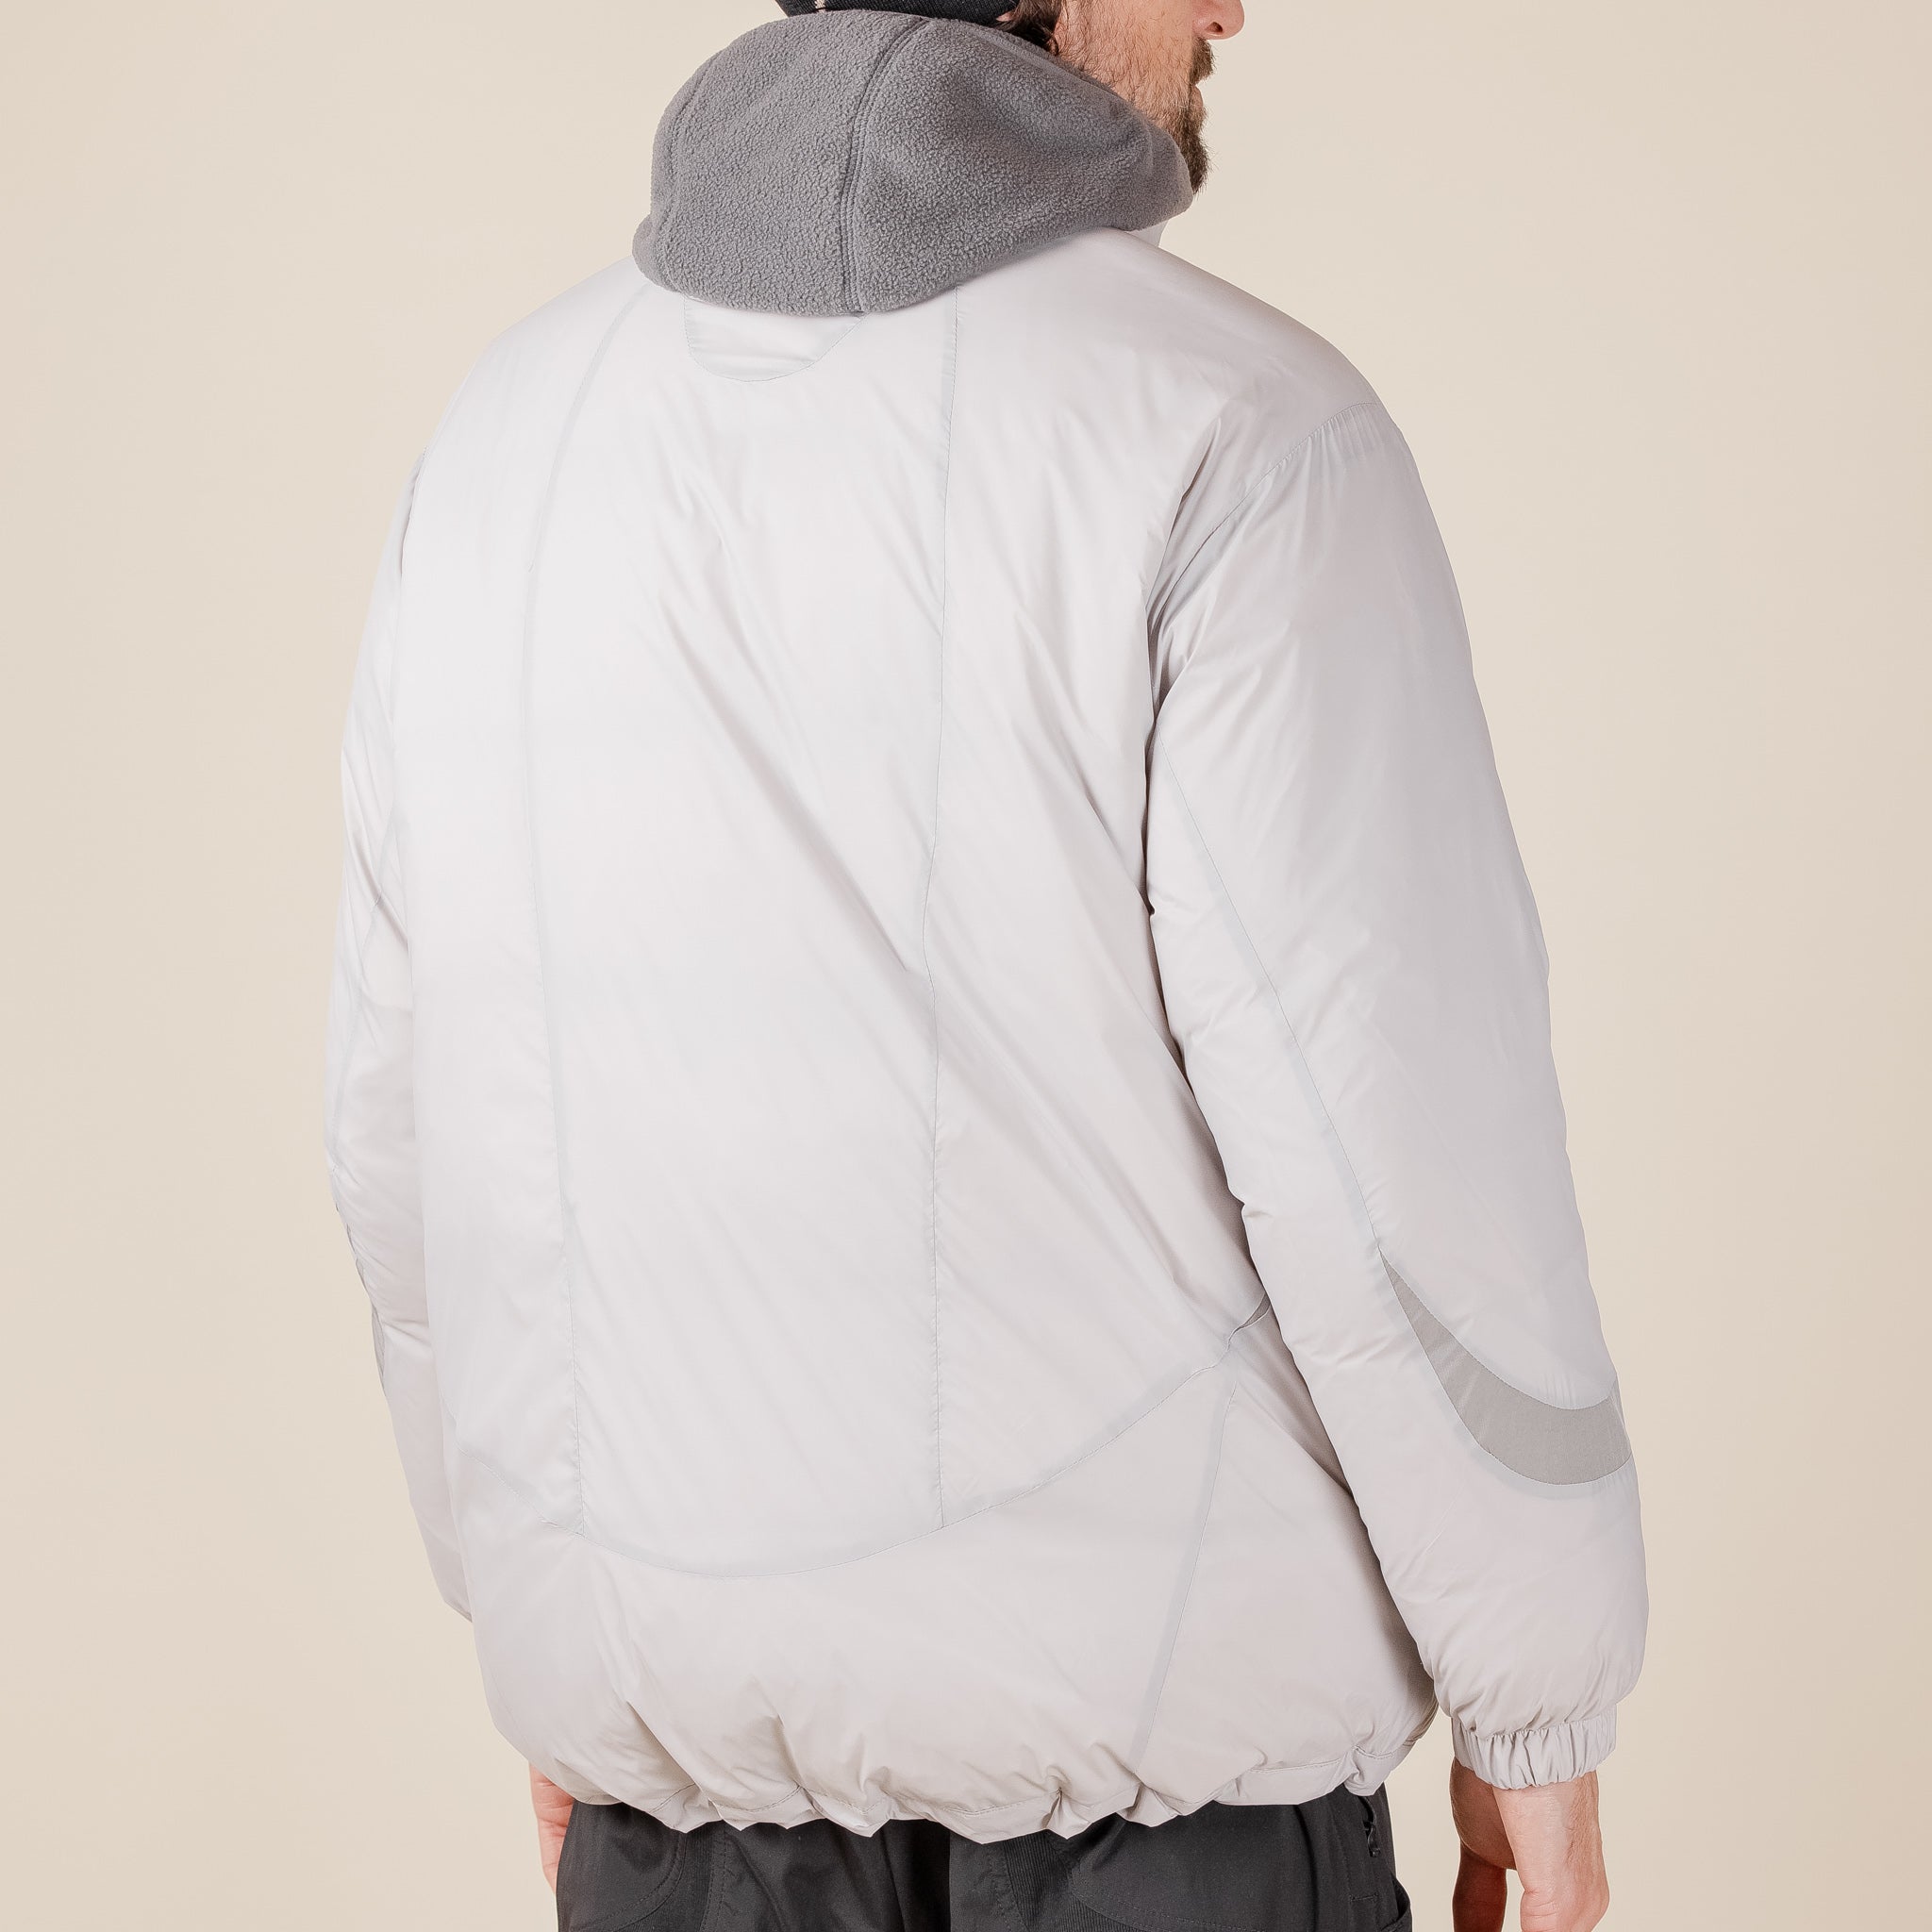 Welter Experiment - WOL043 Signature Line Down Jacket - Light Grey